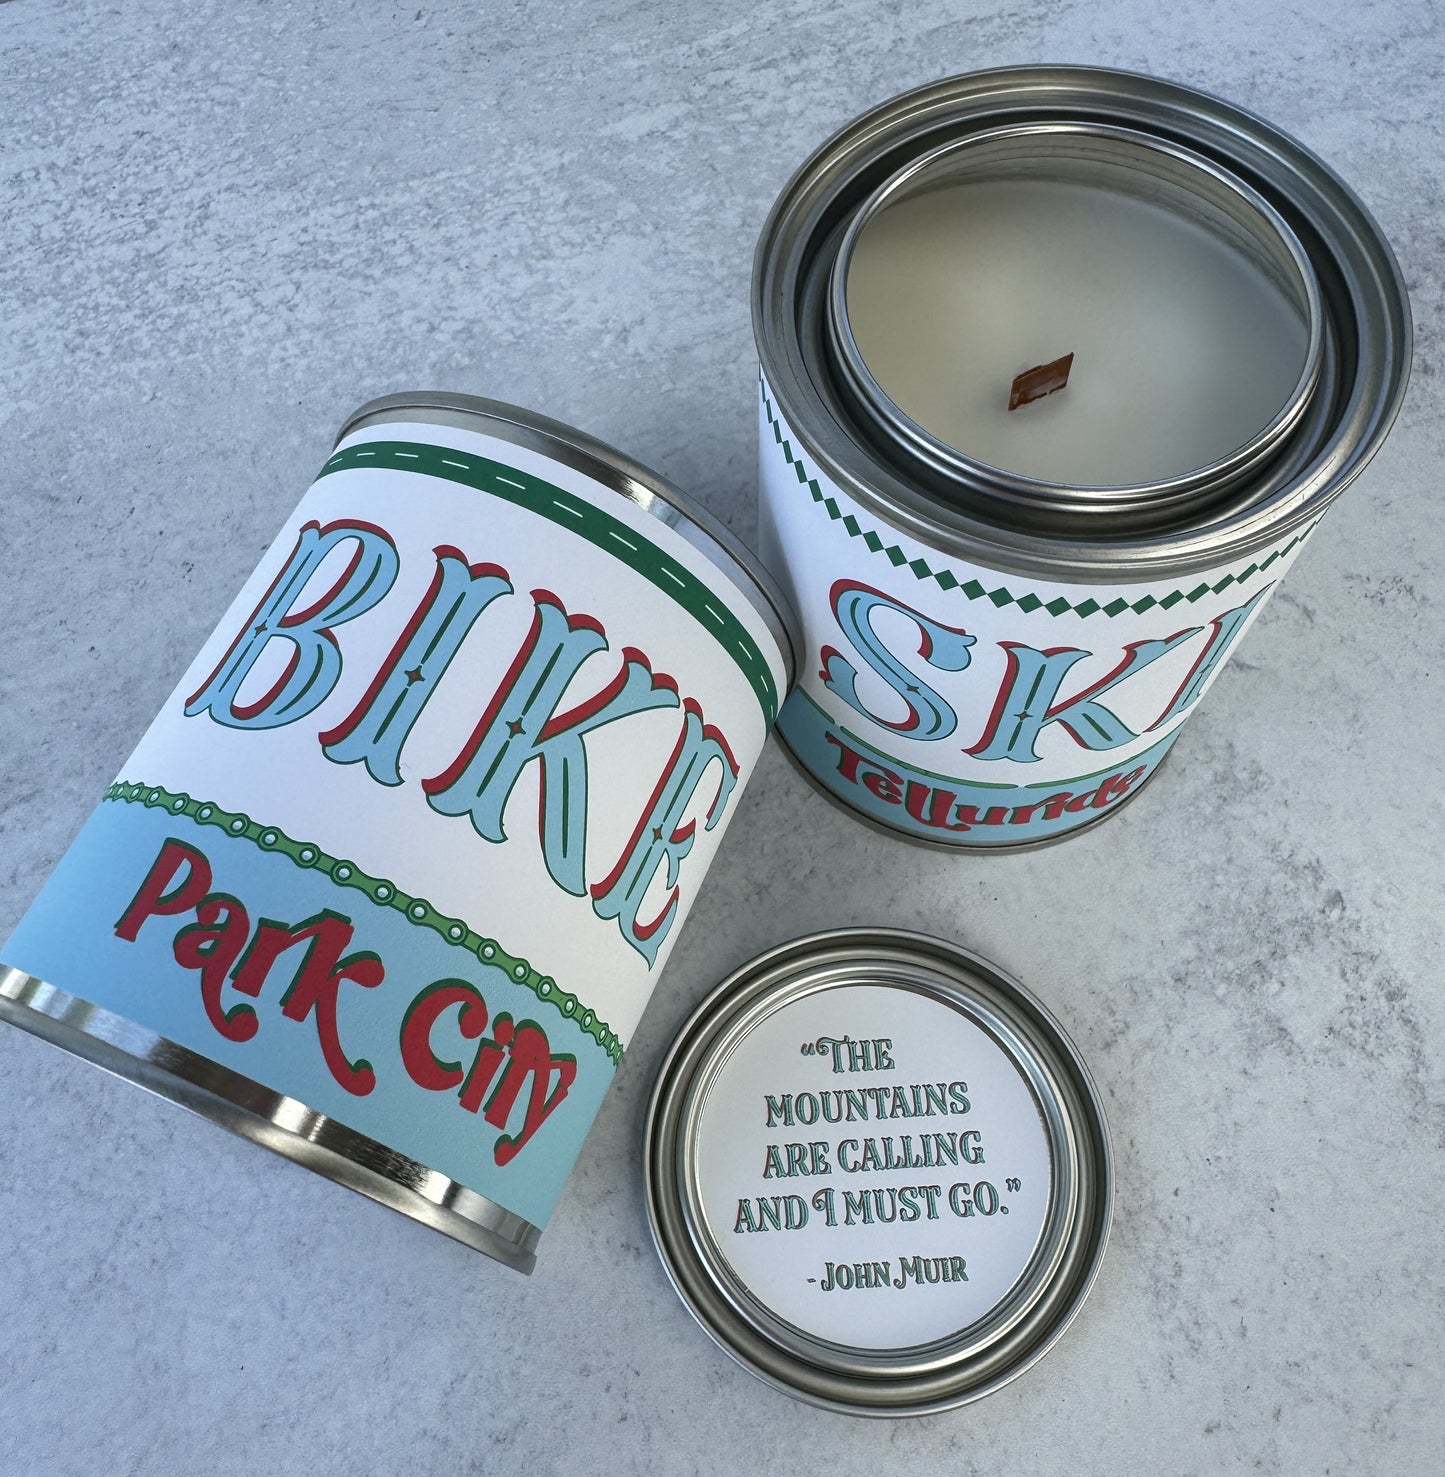 Hike Pacific Crest Trail - Paint Tin Candle